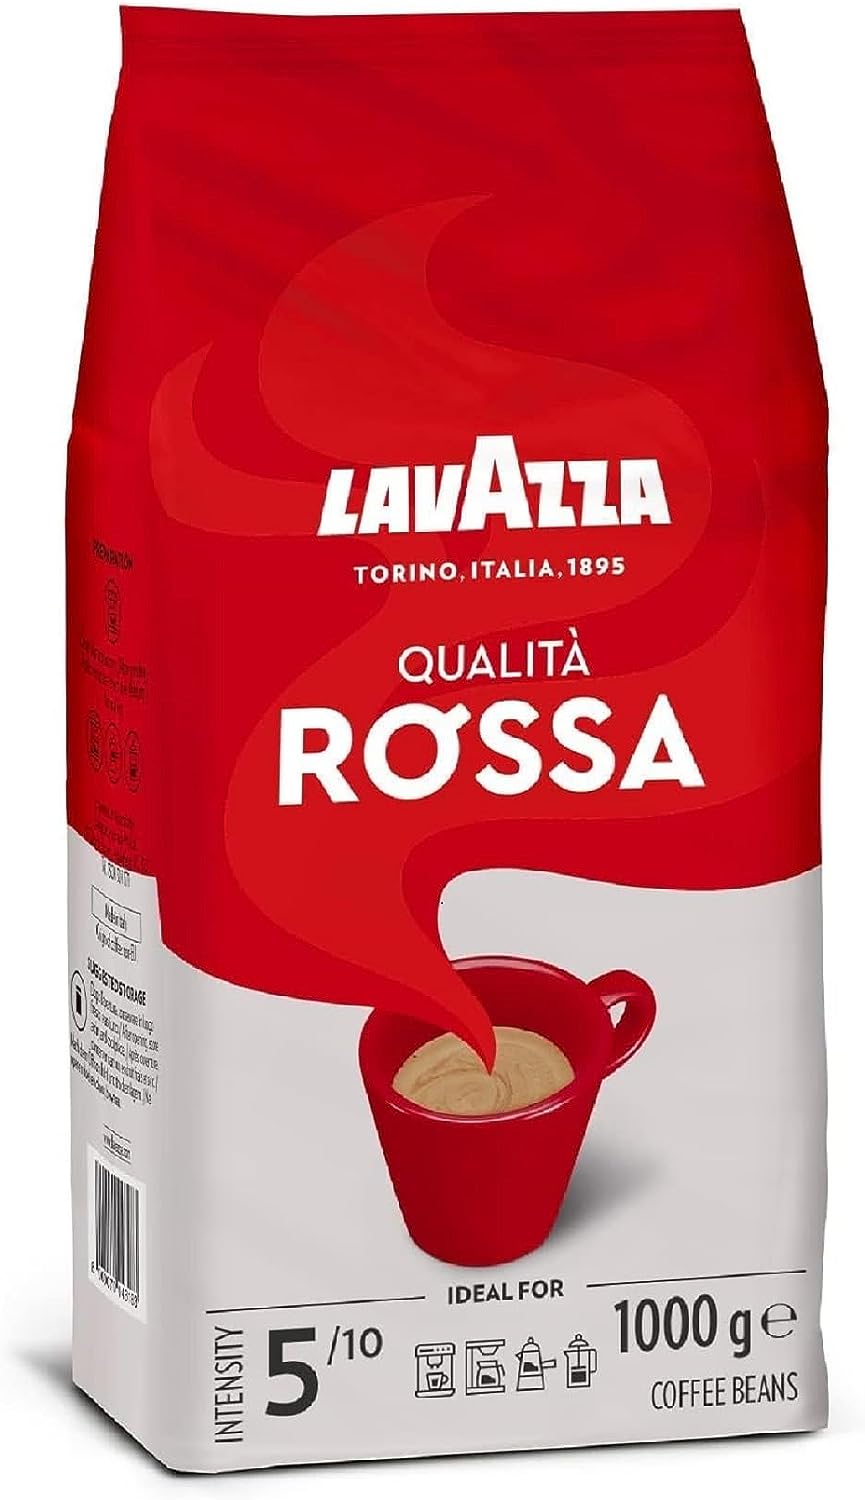 Lavazza, Qualità Rossa, Coffee Beans, with Aromatic Notes of Chocolate and Dried Fruit, Arabica and Robusta, Intensity 5/10, Medium Roasting